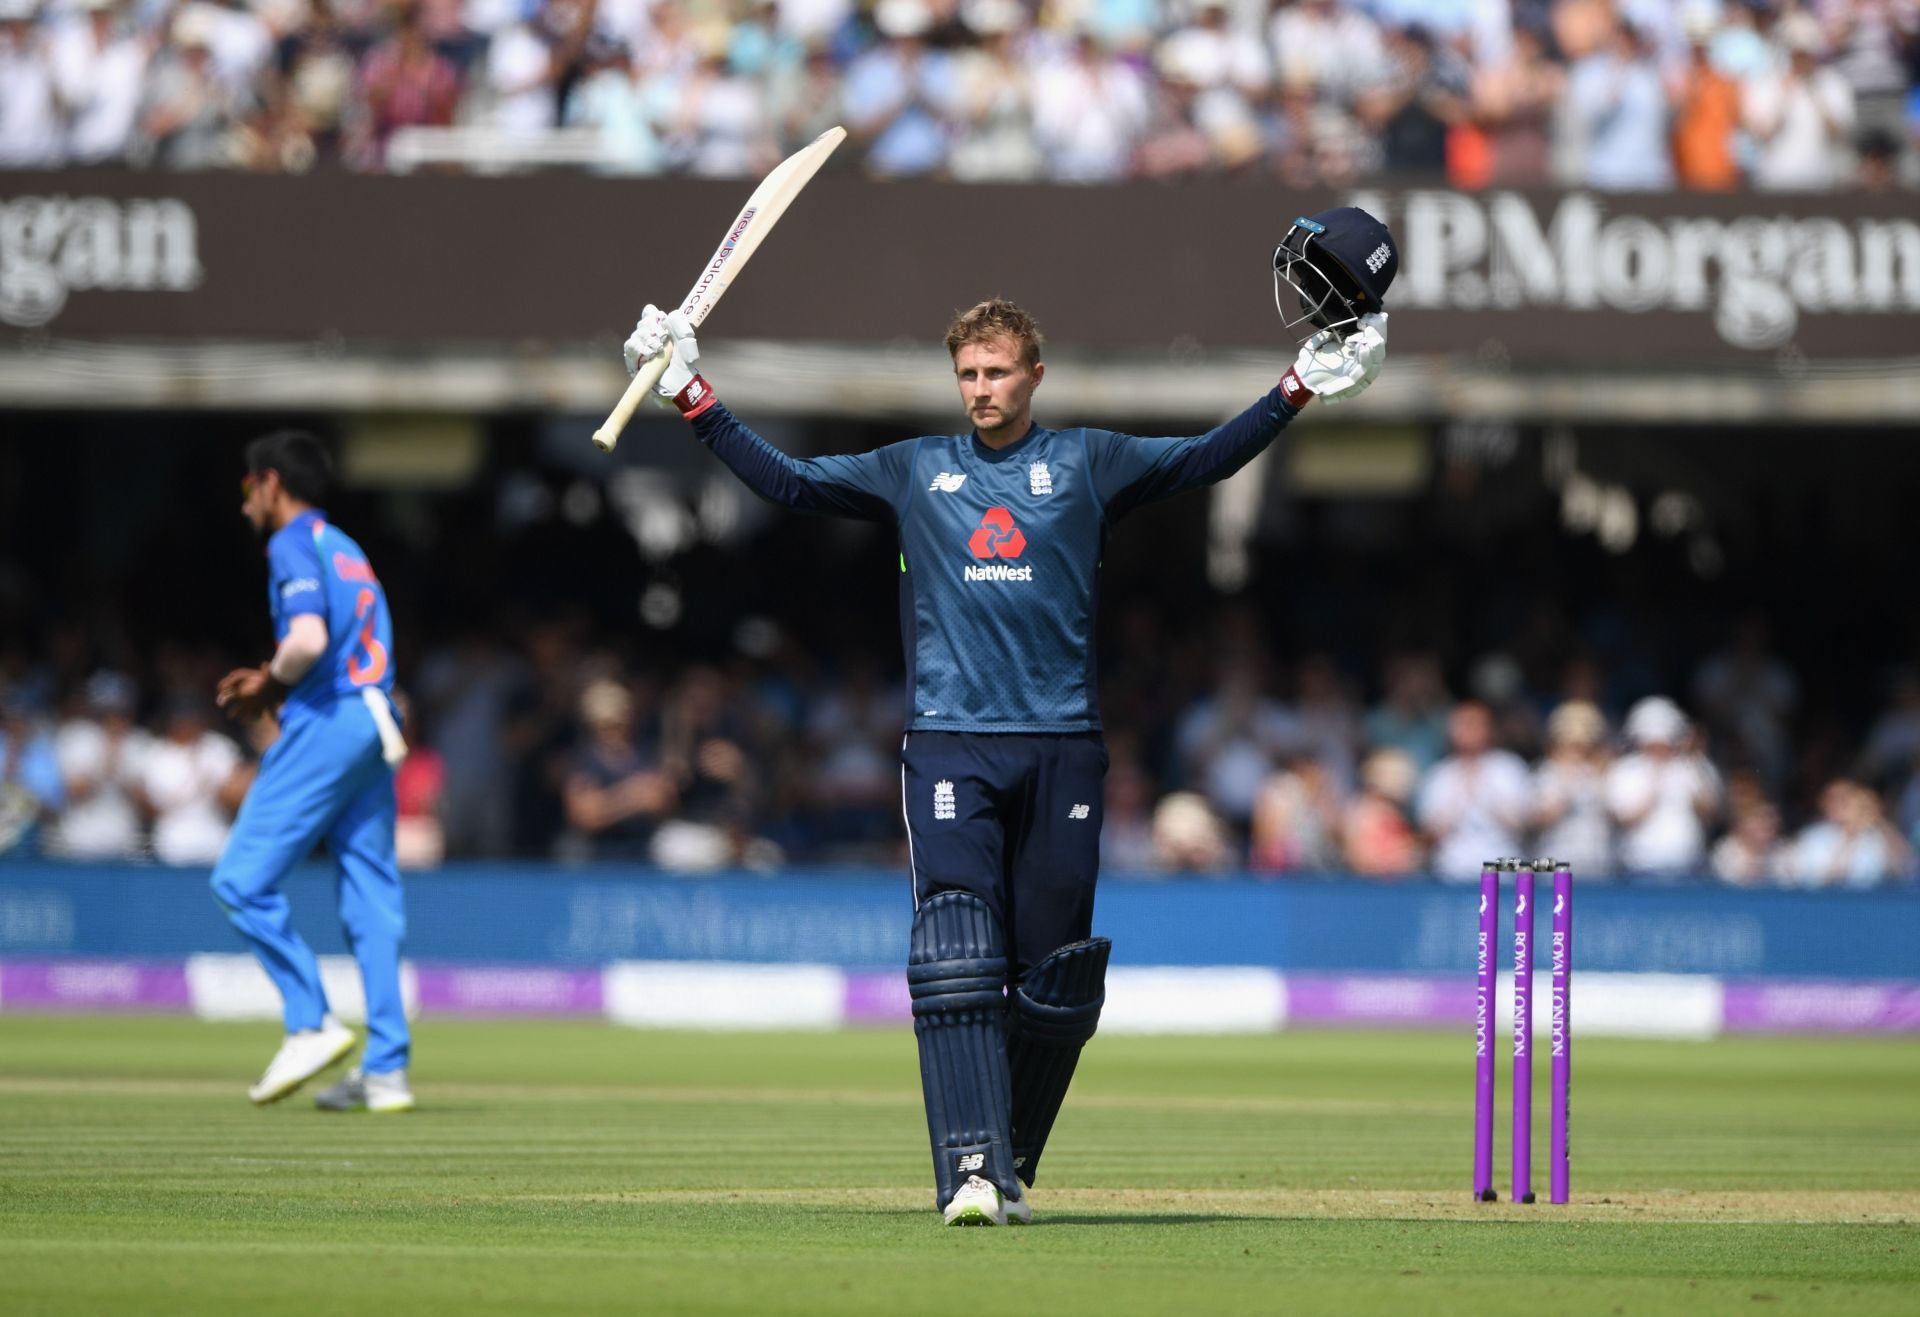 Joe Root after scoring 100 in the 2nd ODI in 2018: Royal London One-Day Series (Getty Images)